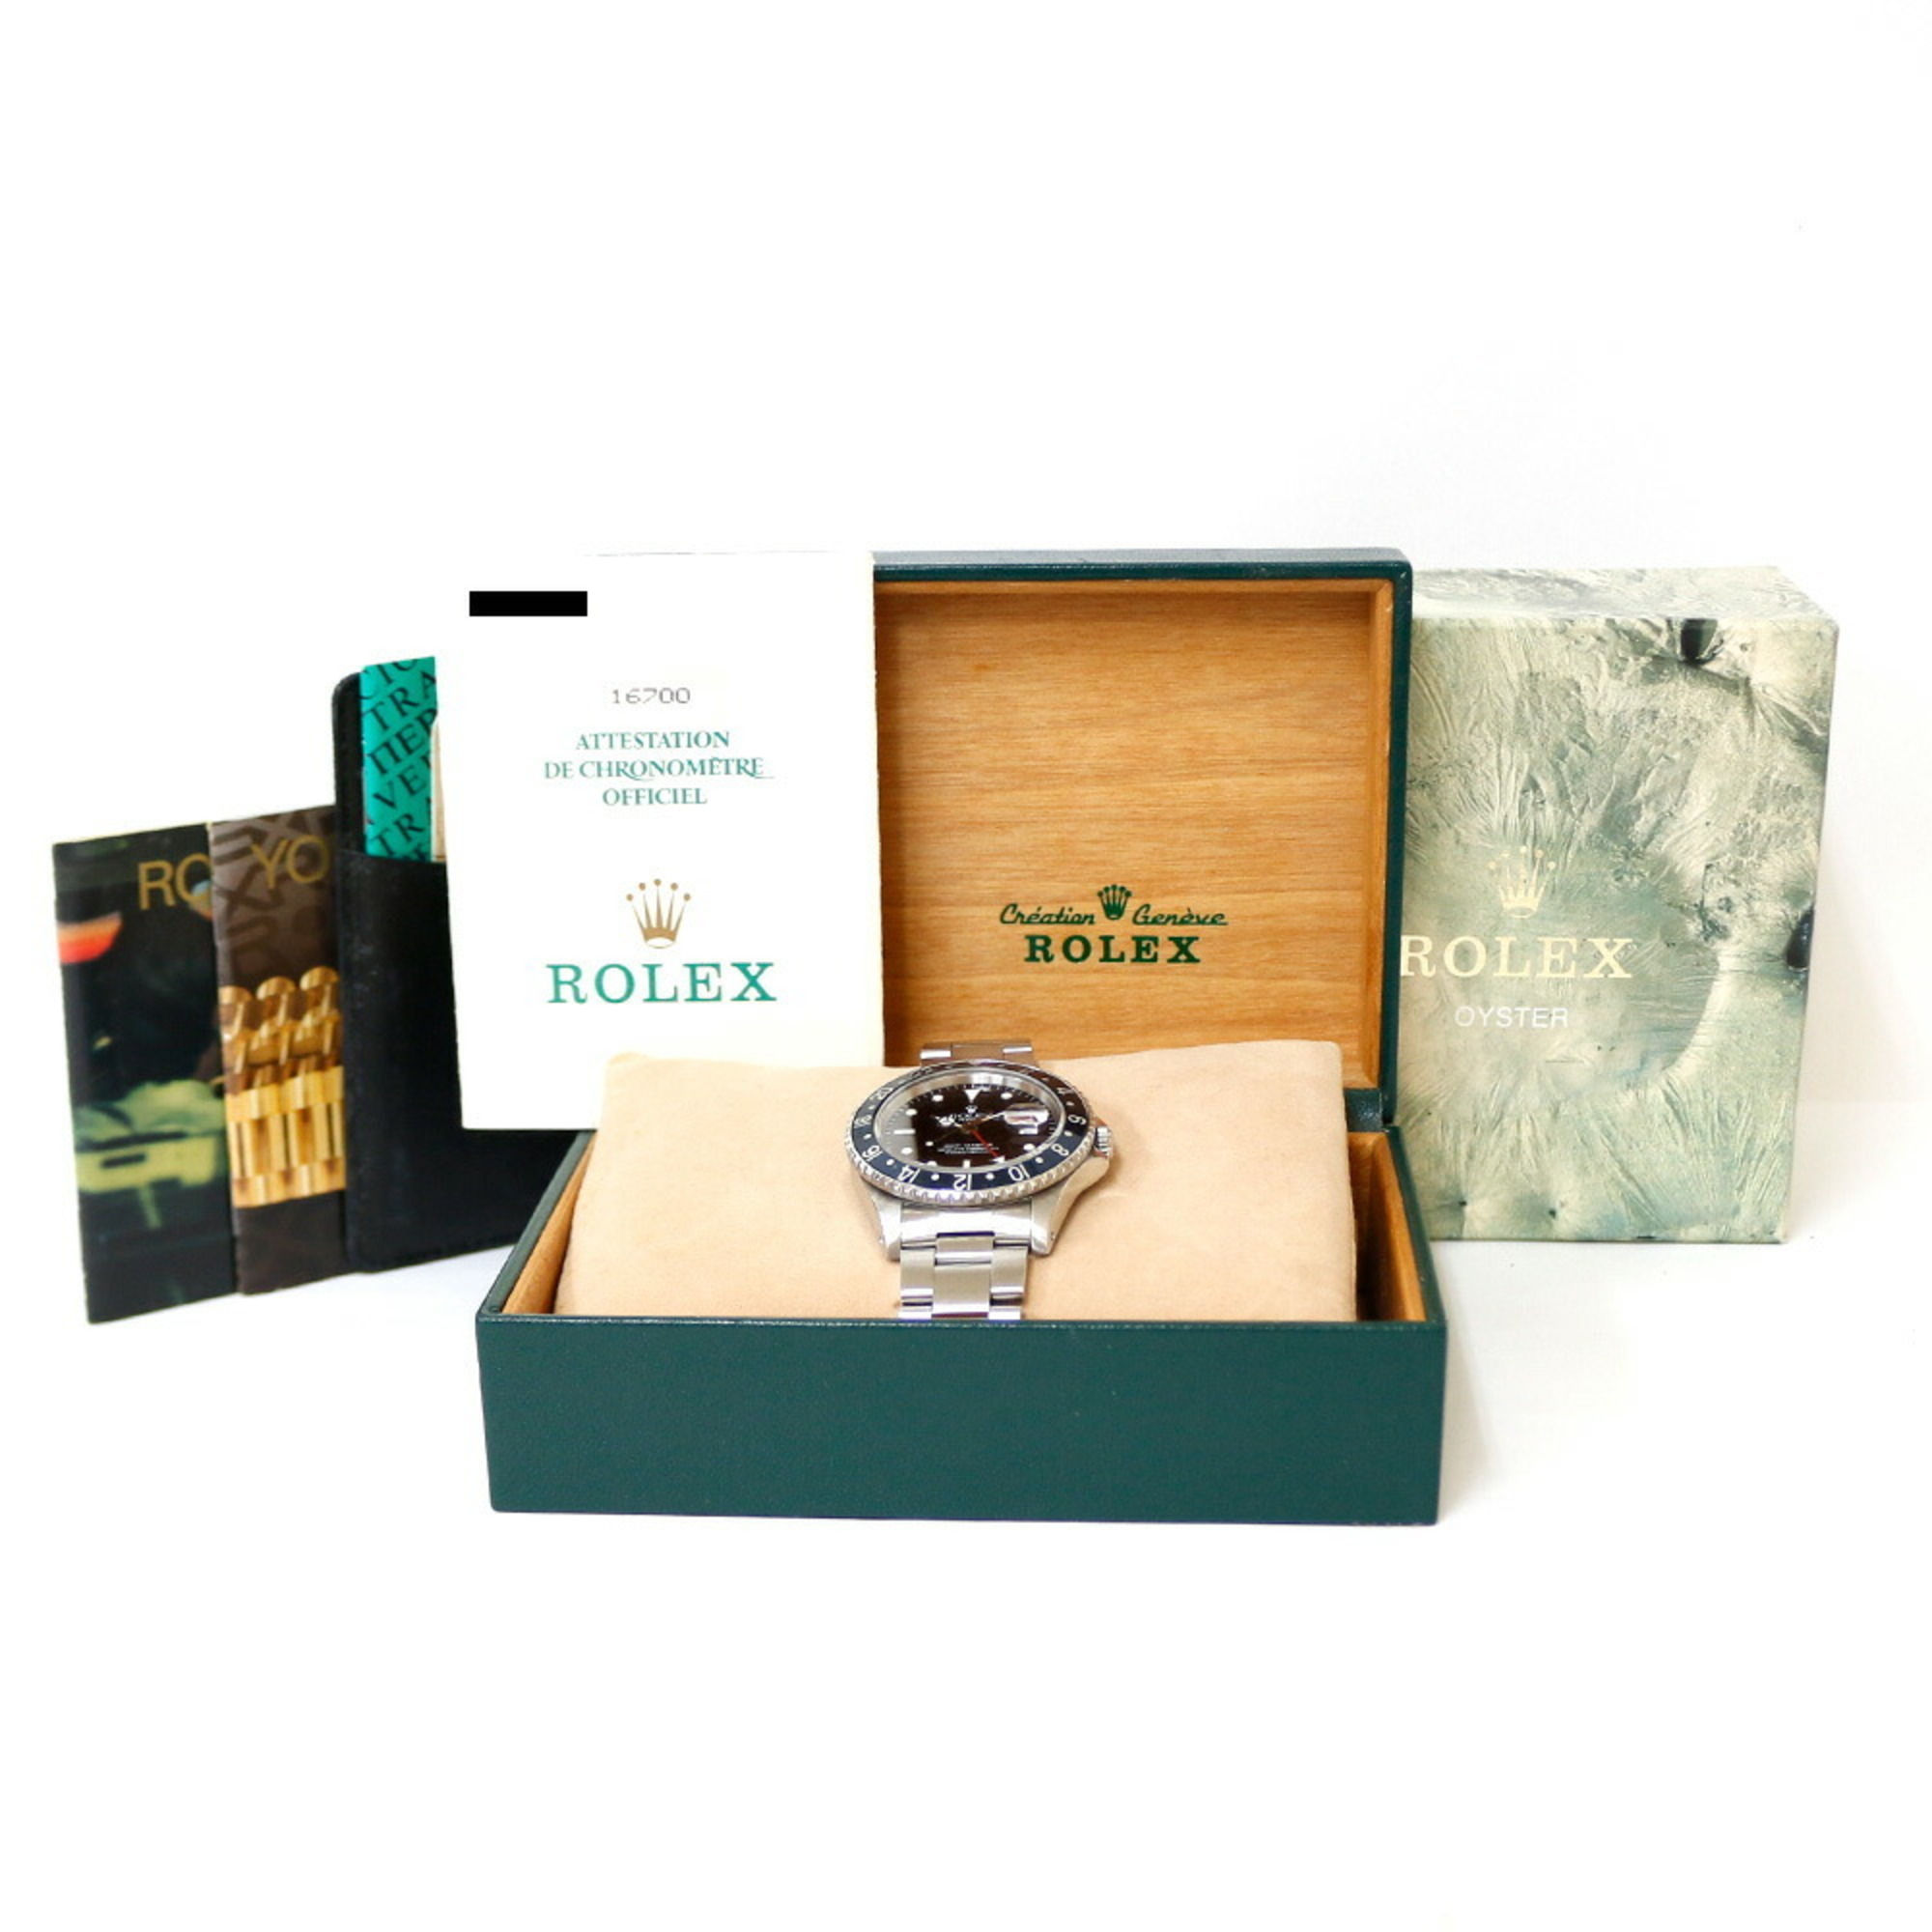 Rolex GMT Master Oyster Perpetual Watch Stainless Steel 16700 Automatic Men's ROLEX